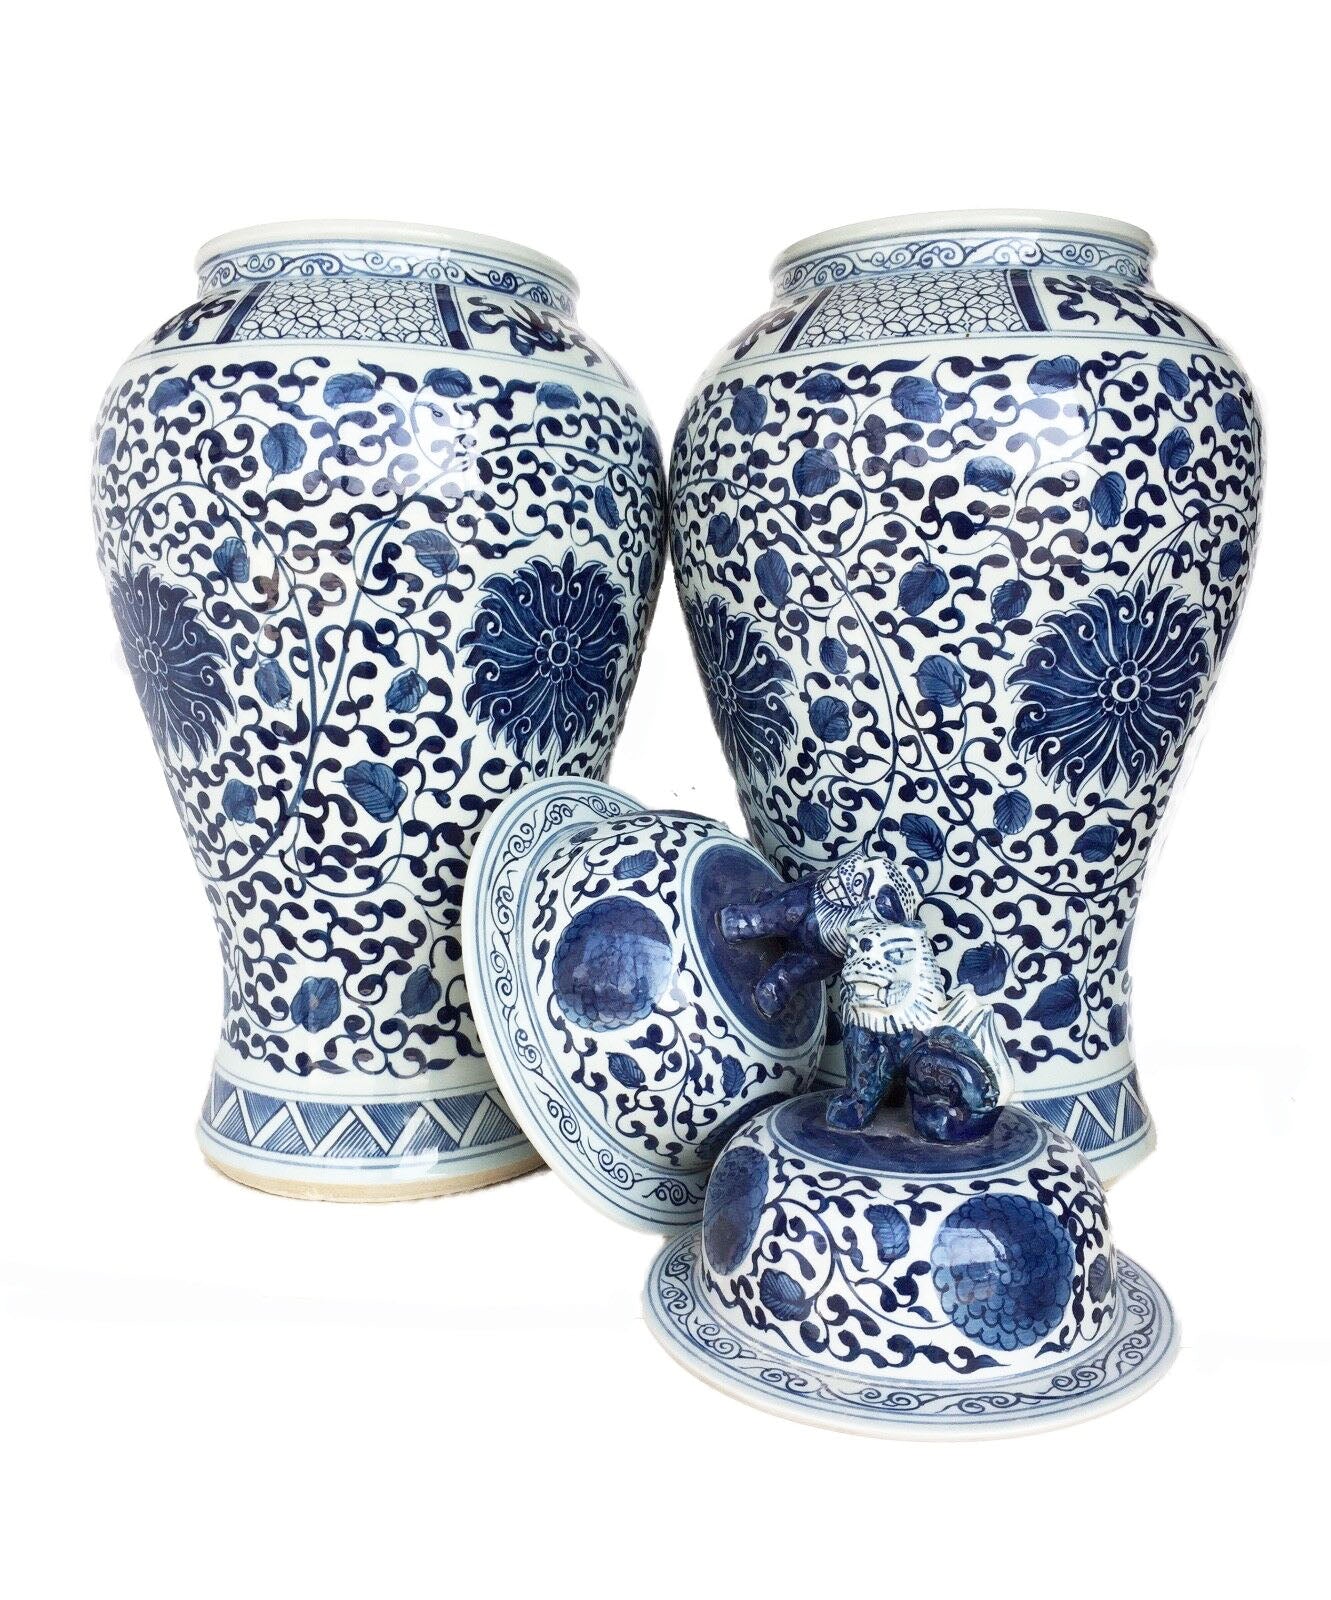 #996 Large Chinoiserie Blue and White Porcelain Ginger Jars -Pair